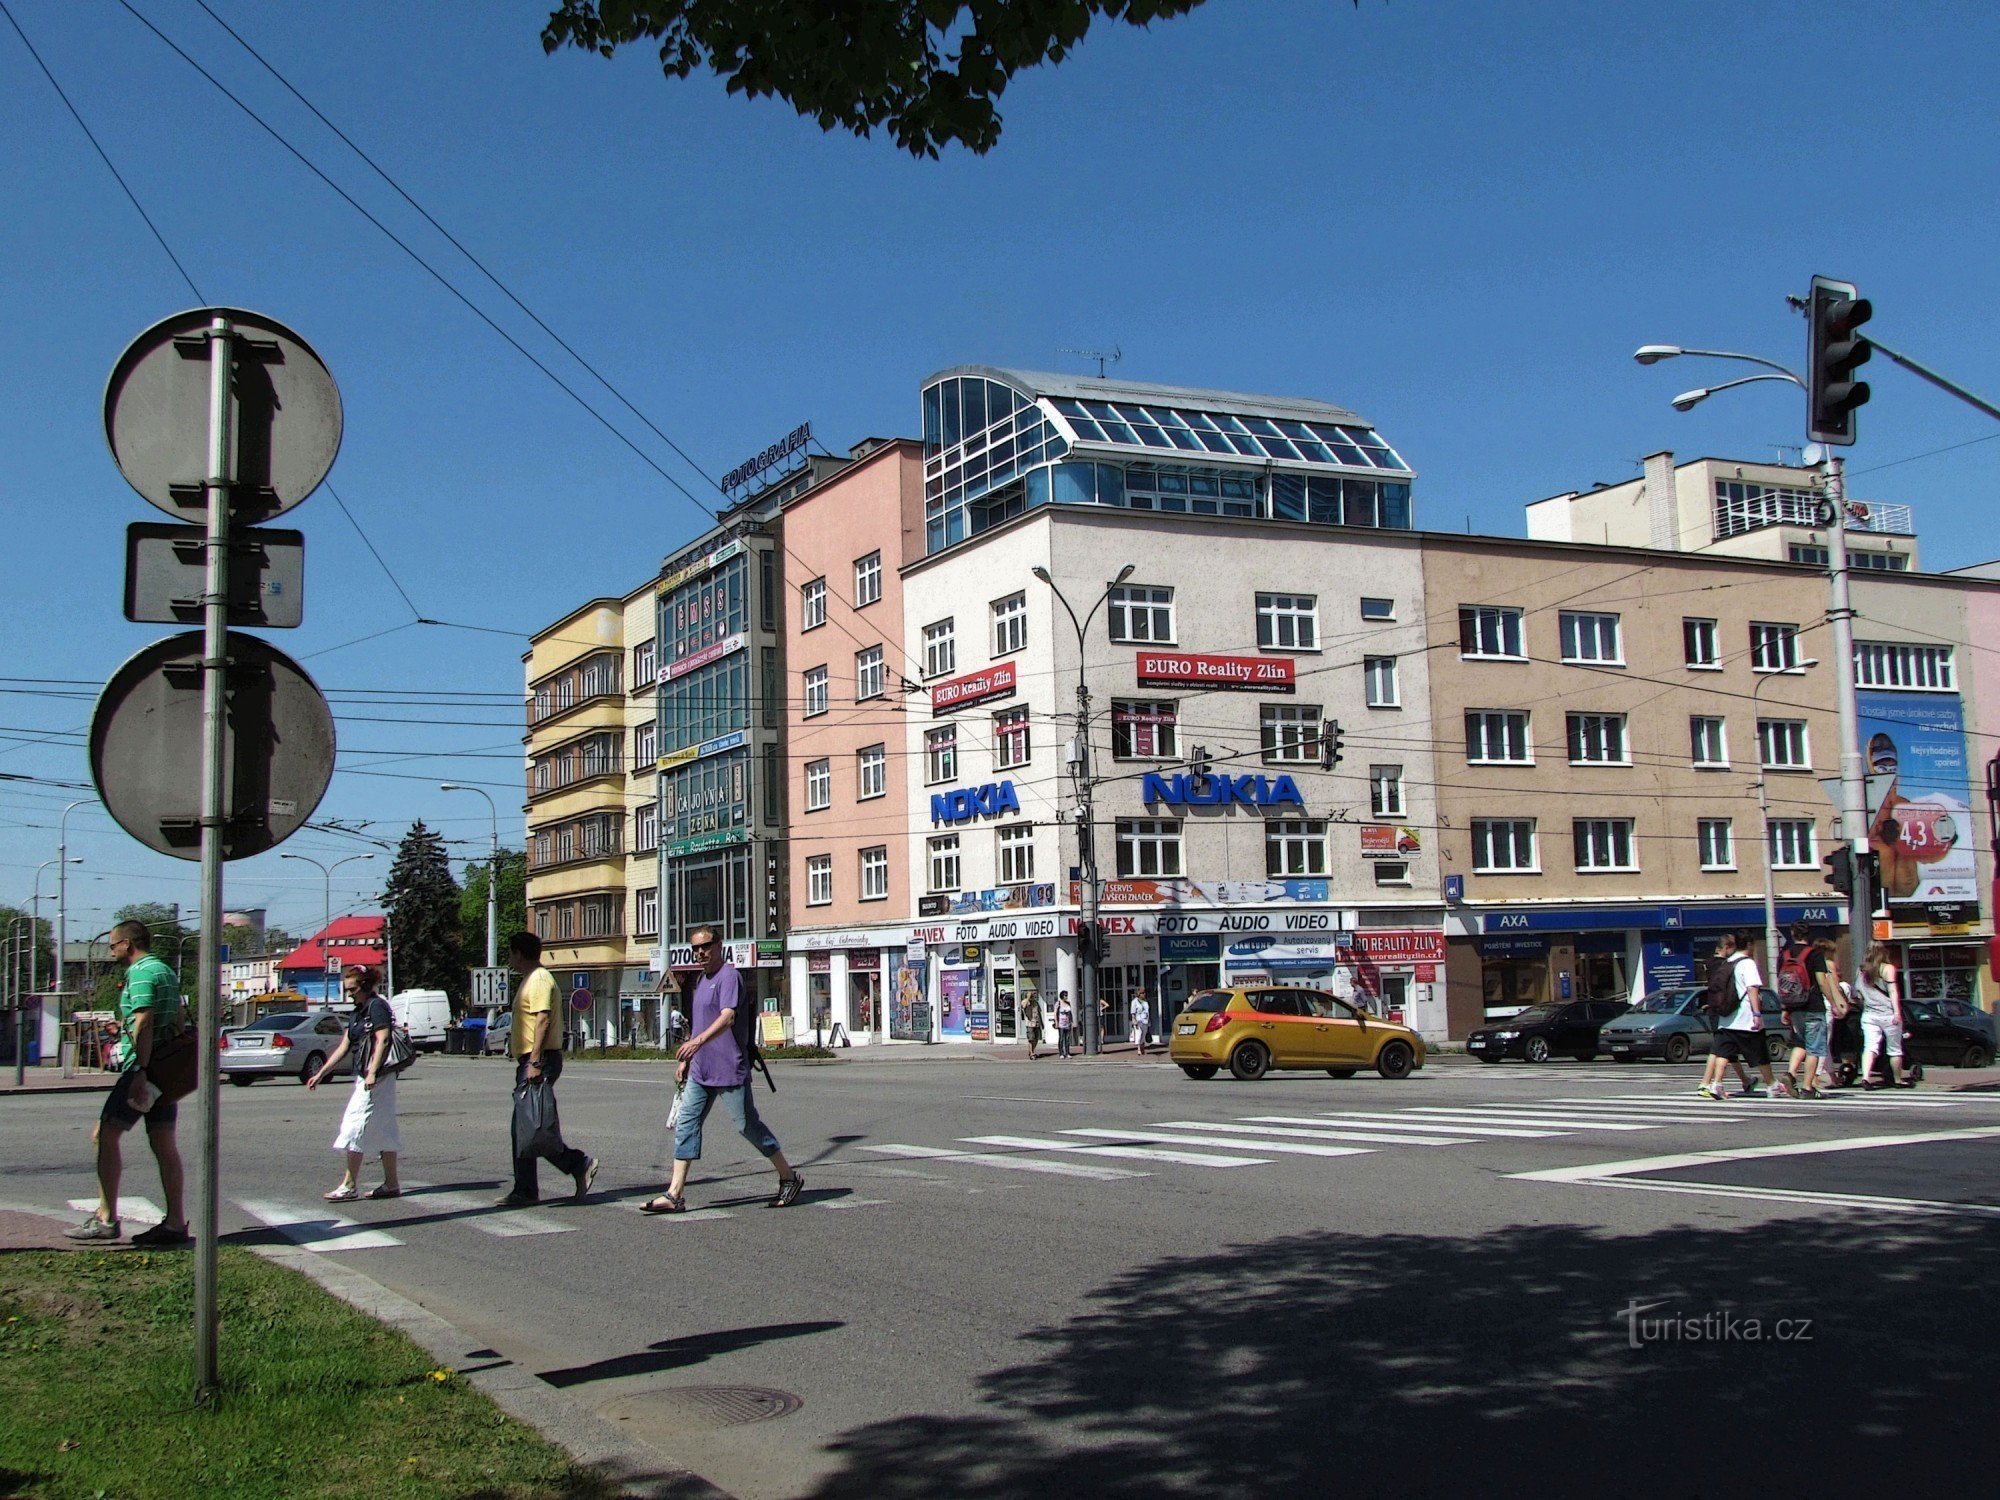 Zlín - one of the main intersections of the city